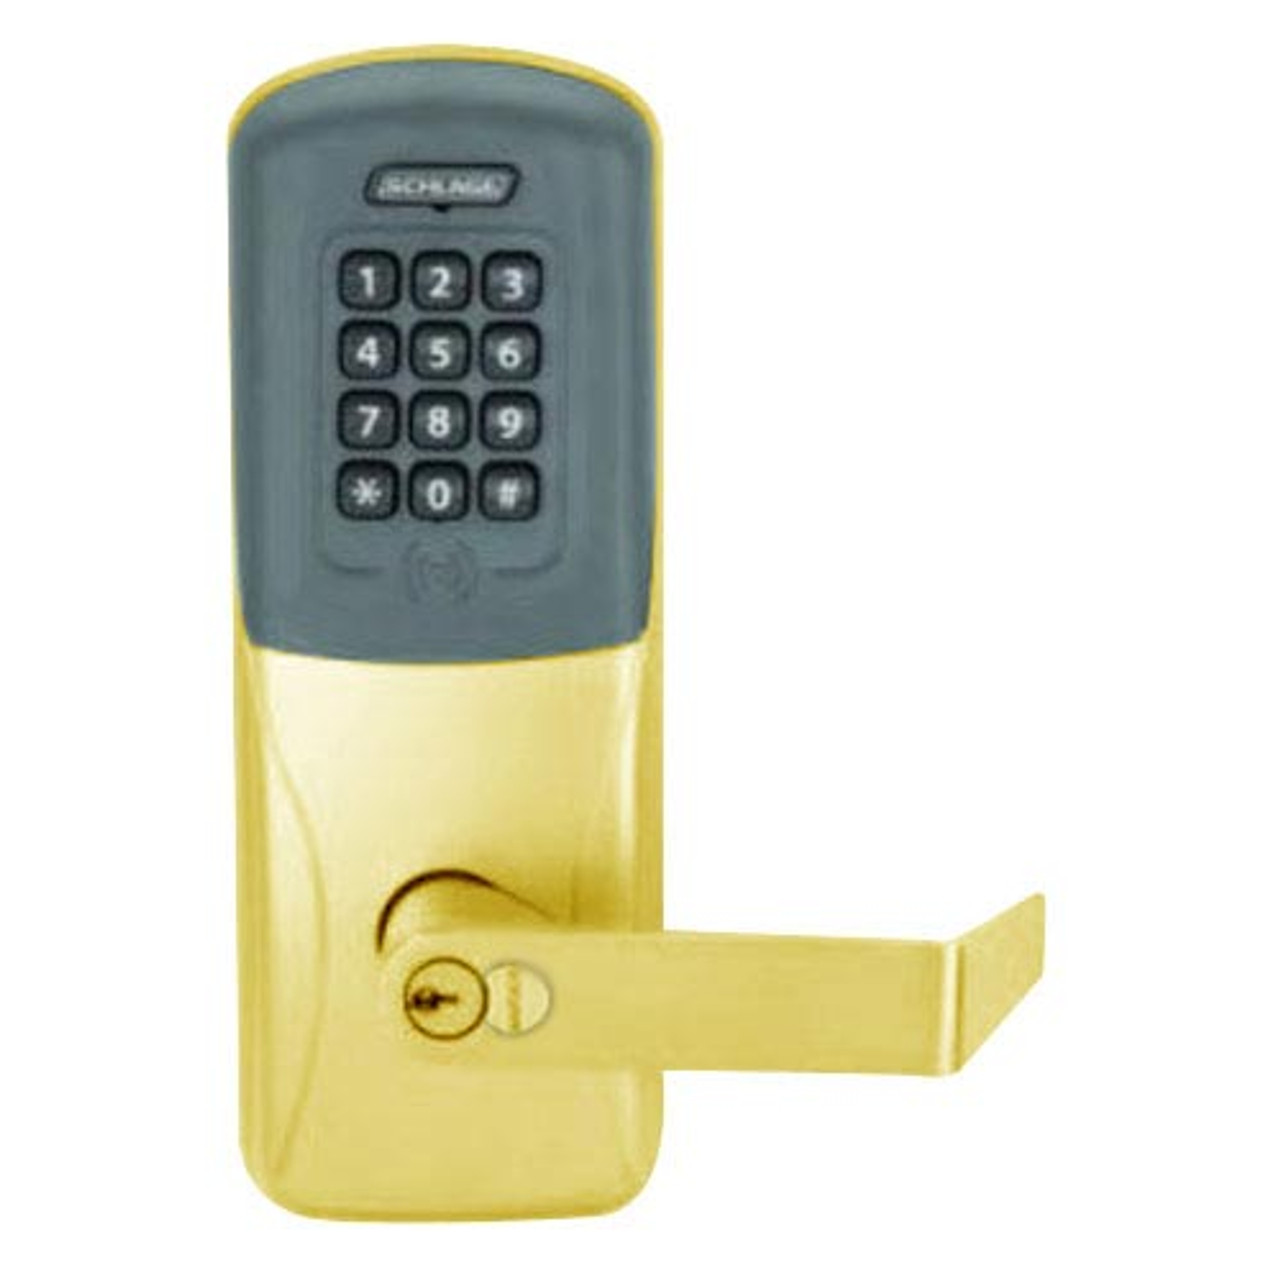 CO200-MD-40-PRK-RHO-GD-29R-605 Mortise Deadbolt Standalone Electronic Proximity with Keypad Locks in Bright Brass